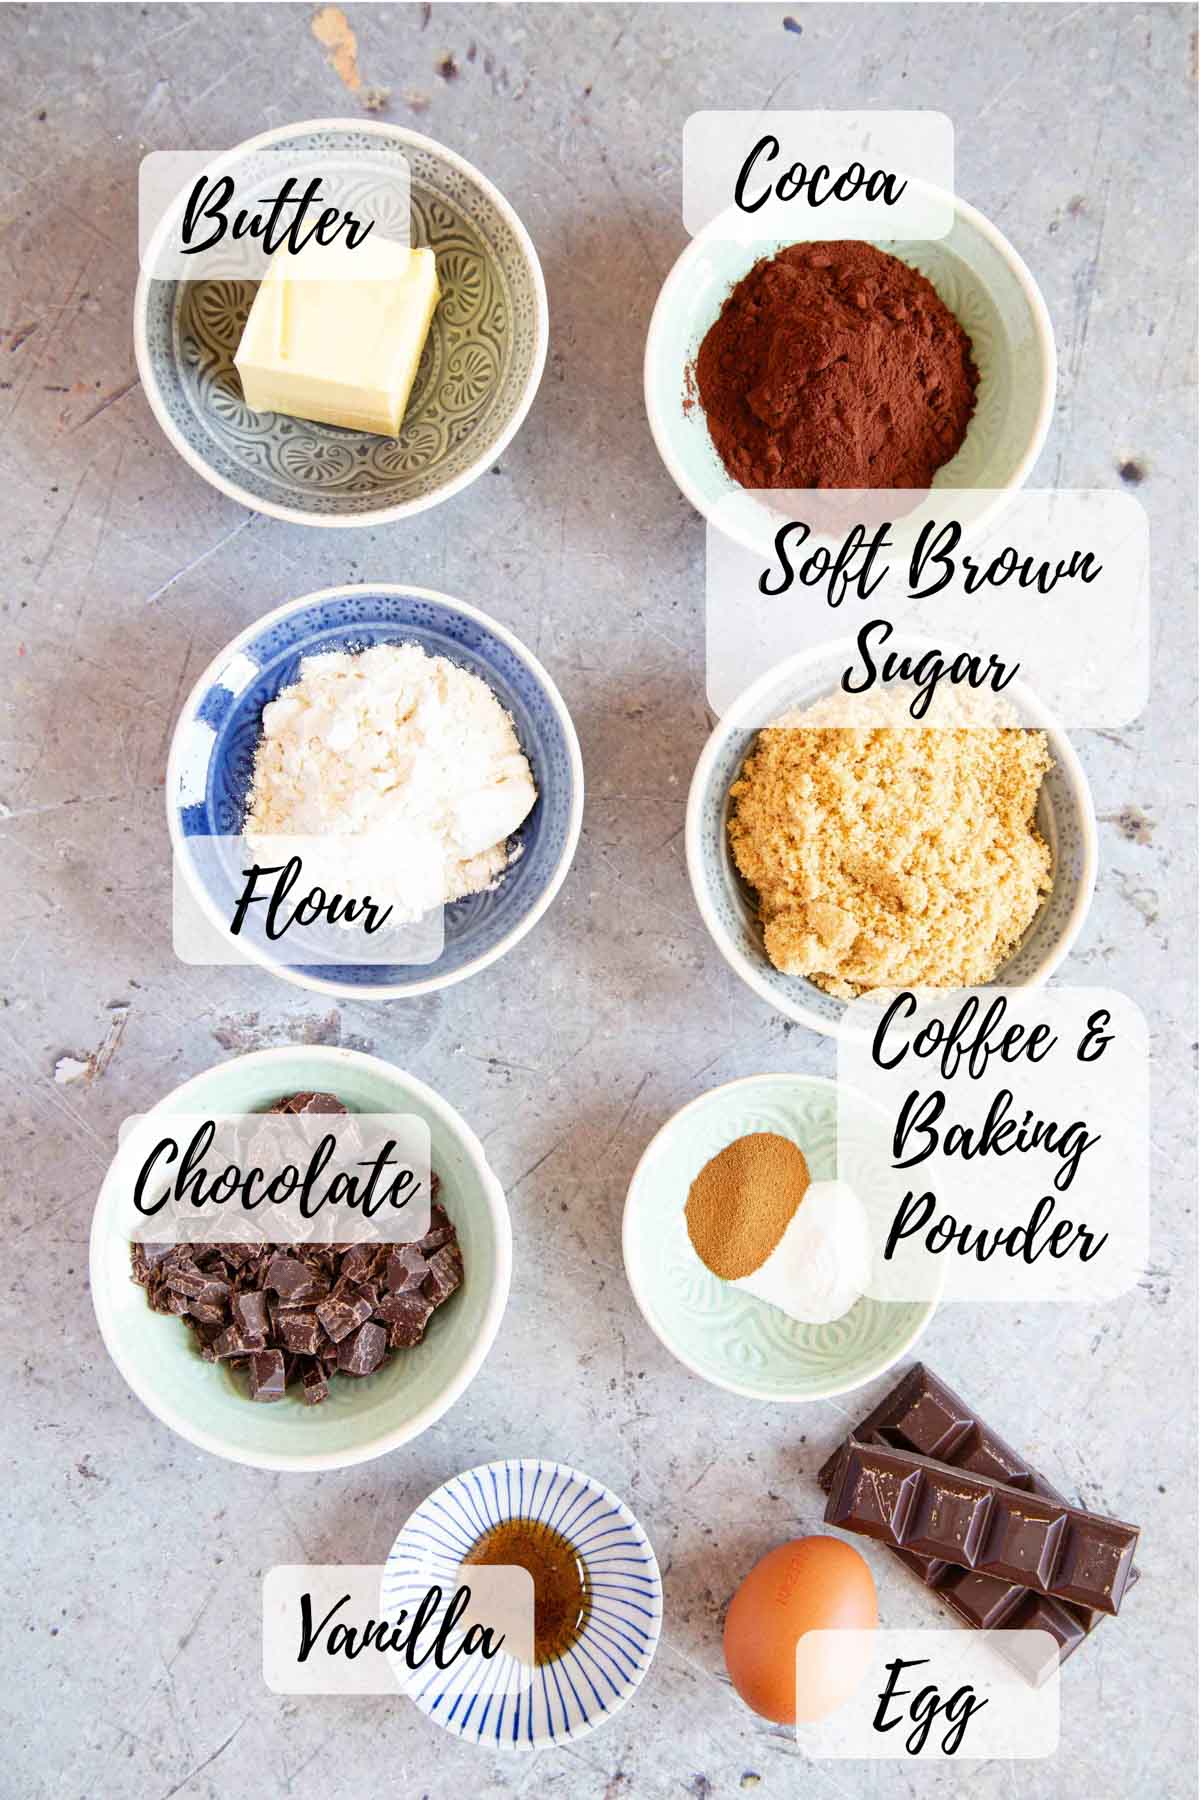 The ingredients: butter, cocoa, soft brown sugar, coffee, baking powder, chocolate, egg, vanilla, chocolate chips or chunks, and flour.